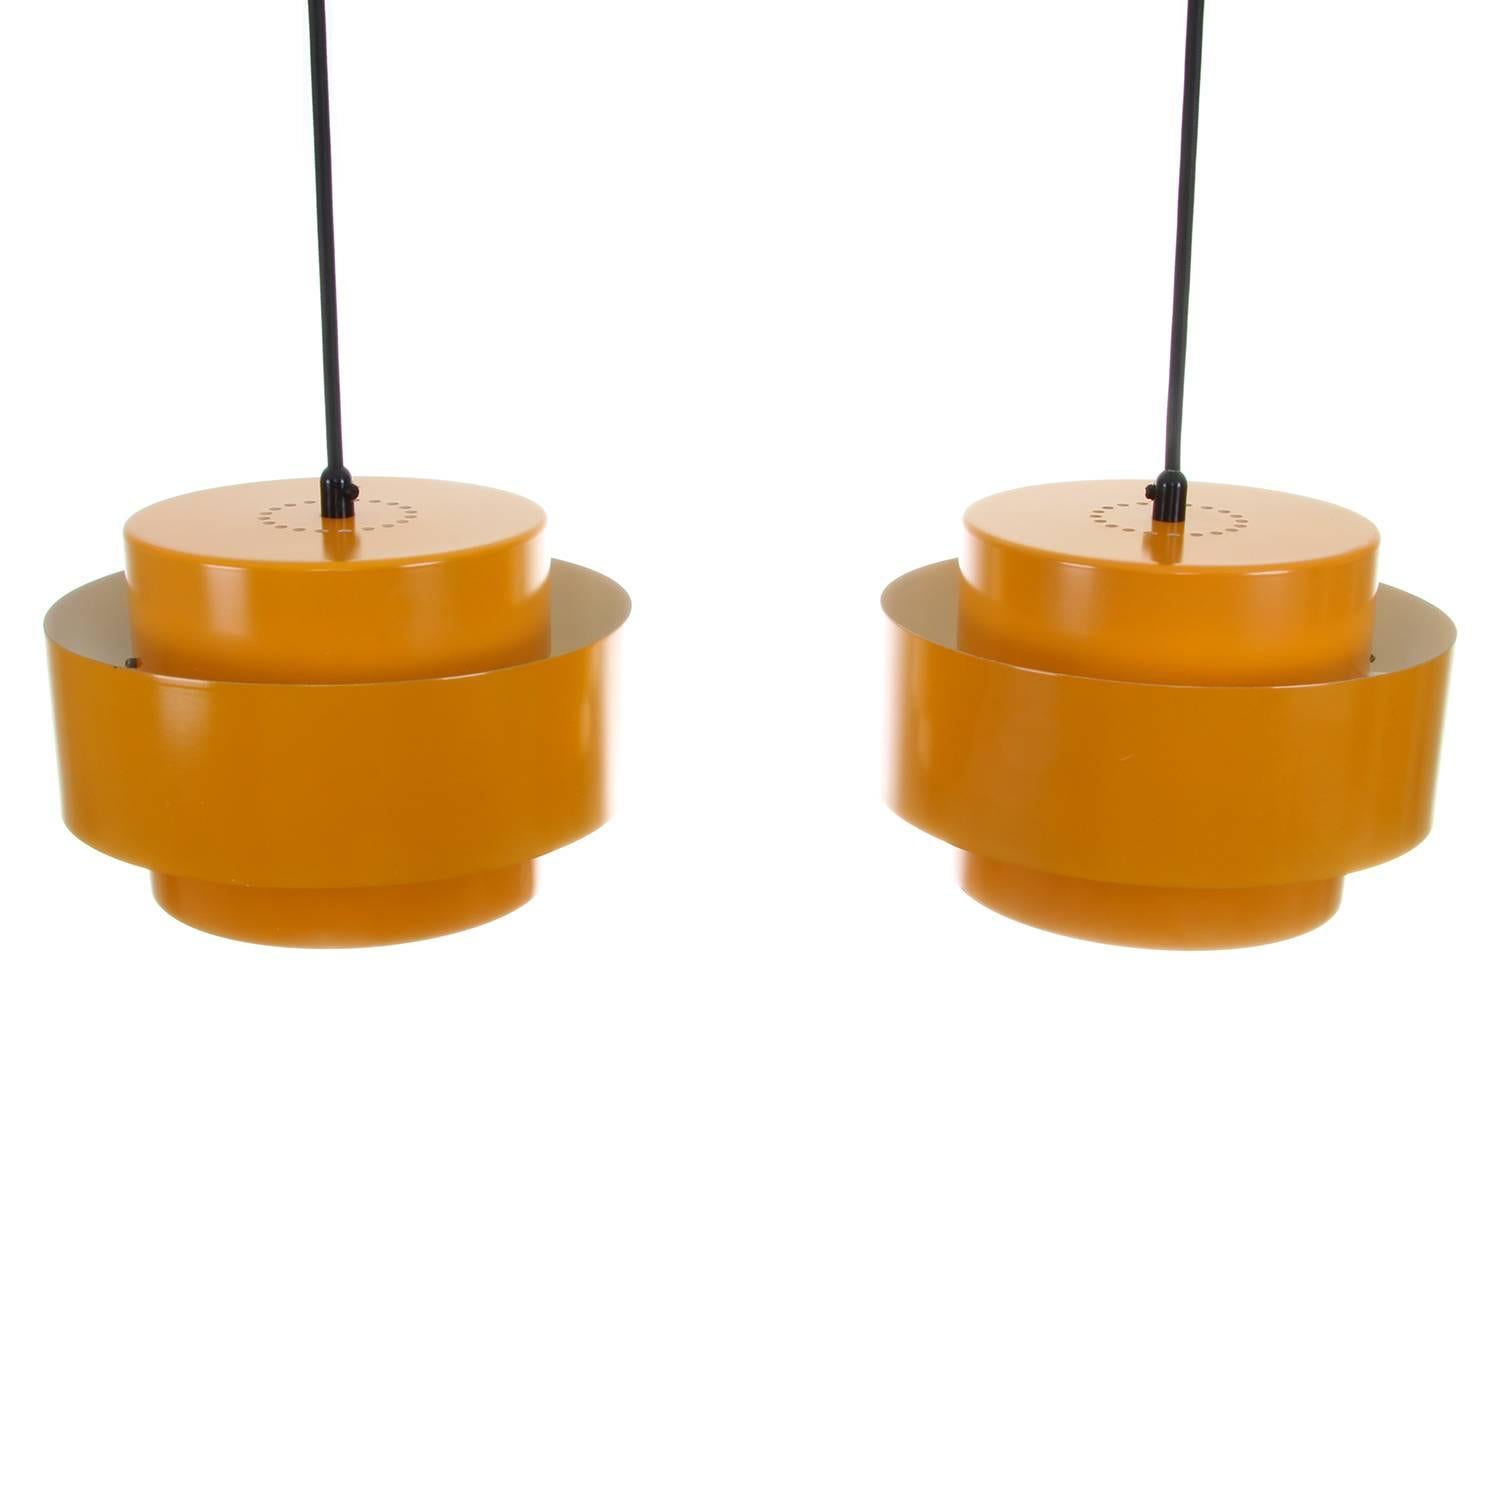 Lacquered JUNO, Sunny Yellow Pendant Pair by Jo Hammerborg in 1969 for Fog & Morup